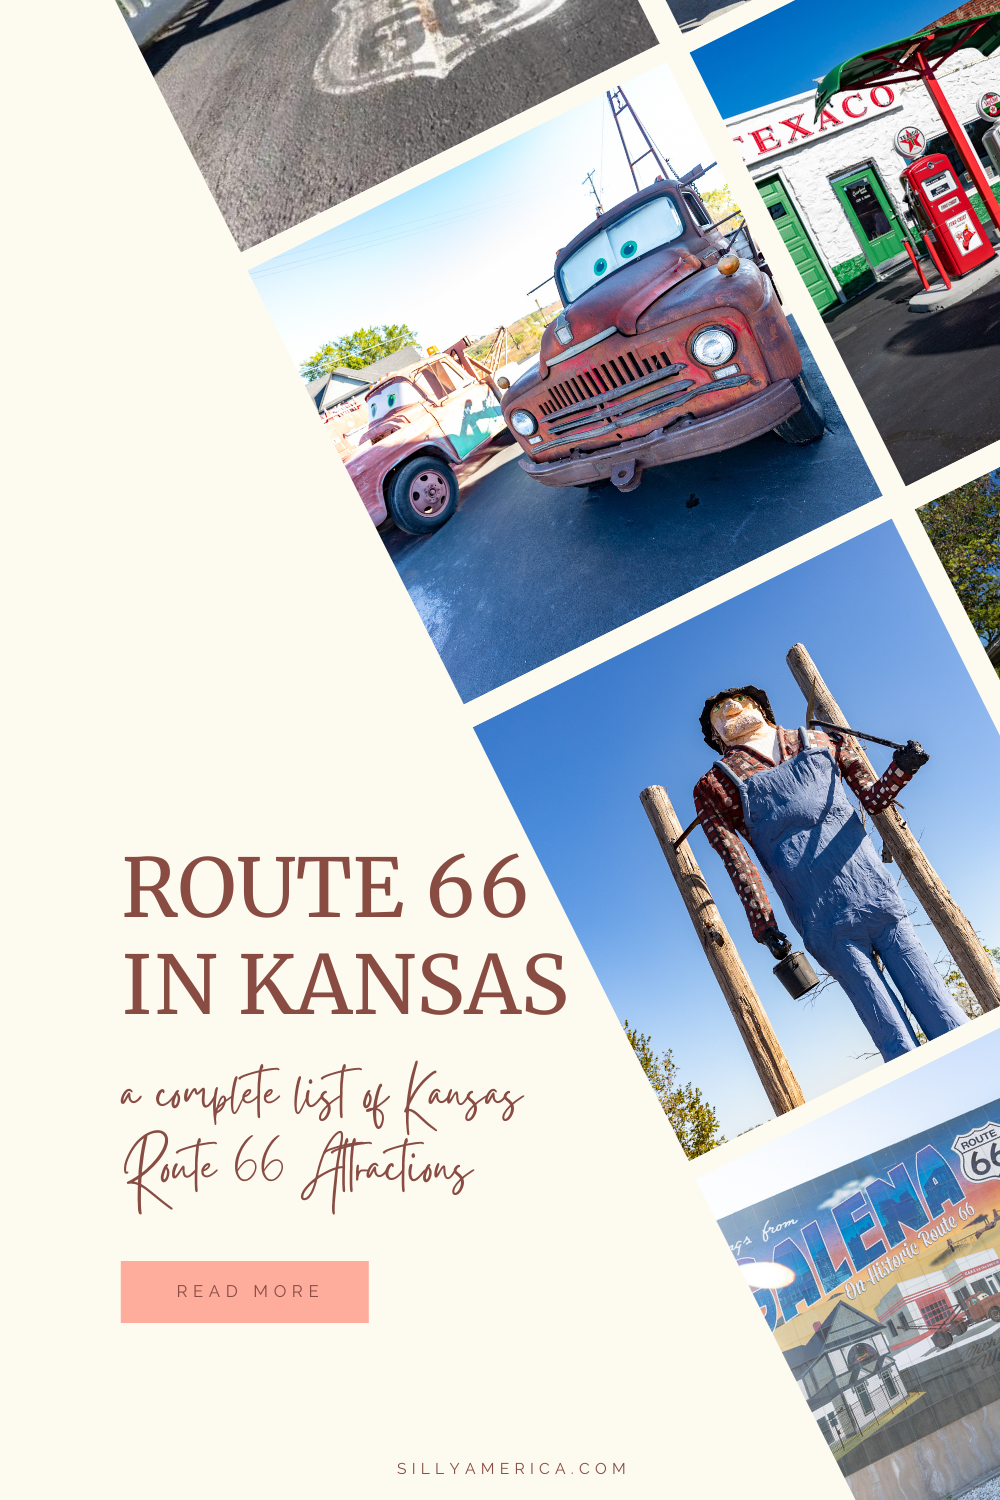 If you’re looking for classic roadside attractions, iconic road trip stops, informative museums, and nostalgic nod to the past, a road trip on Route 66 in Kansas offers everything you’re looking for. Pull over at any and all of the stops on this complete list of Kansas Route 66 Attractions and start planning your road trip on the Mother Road today. #Route66 #Kansas #Route66RoadTrip #KansasRoute66 #KansasRoute66RoadTrip #KansasRoadTrip #travel #RoadTrip